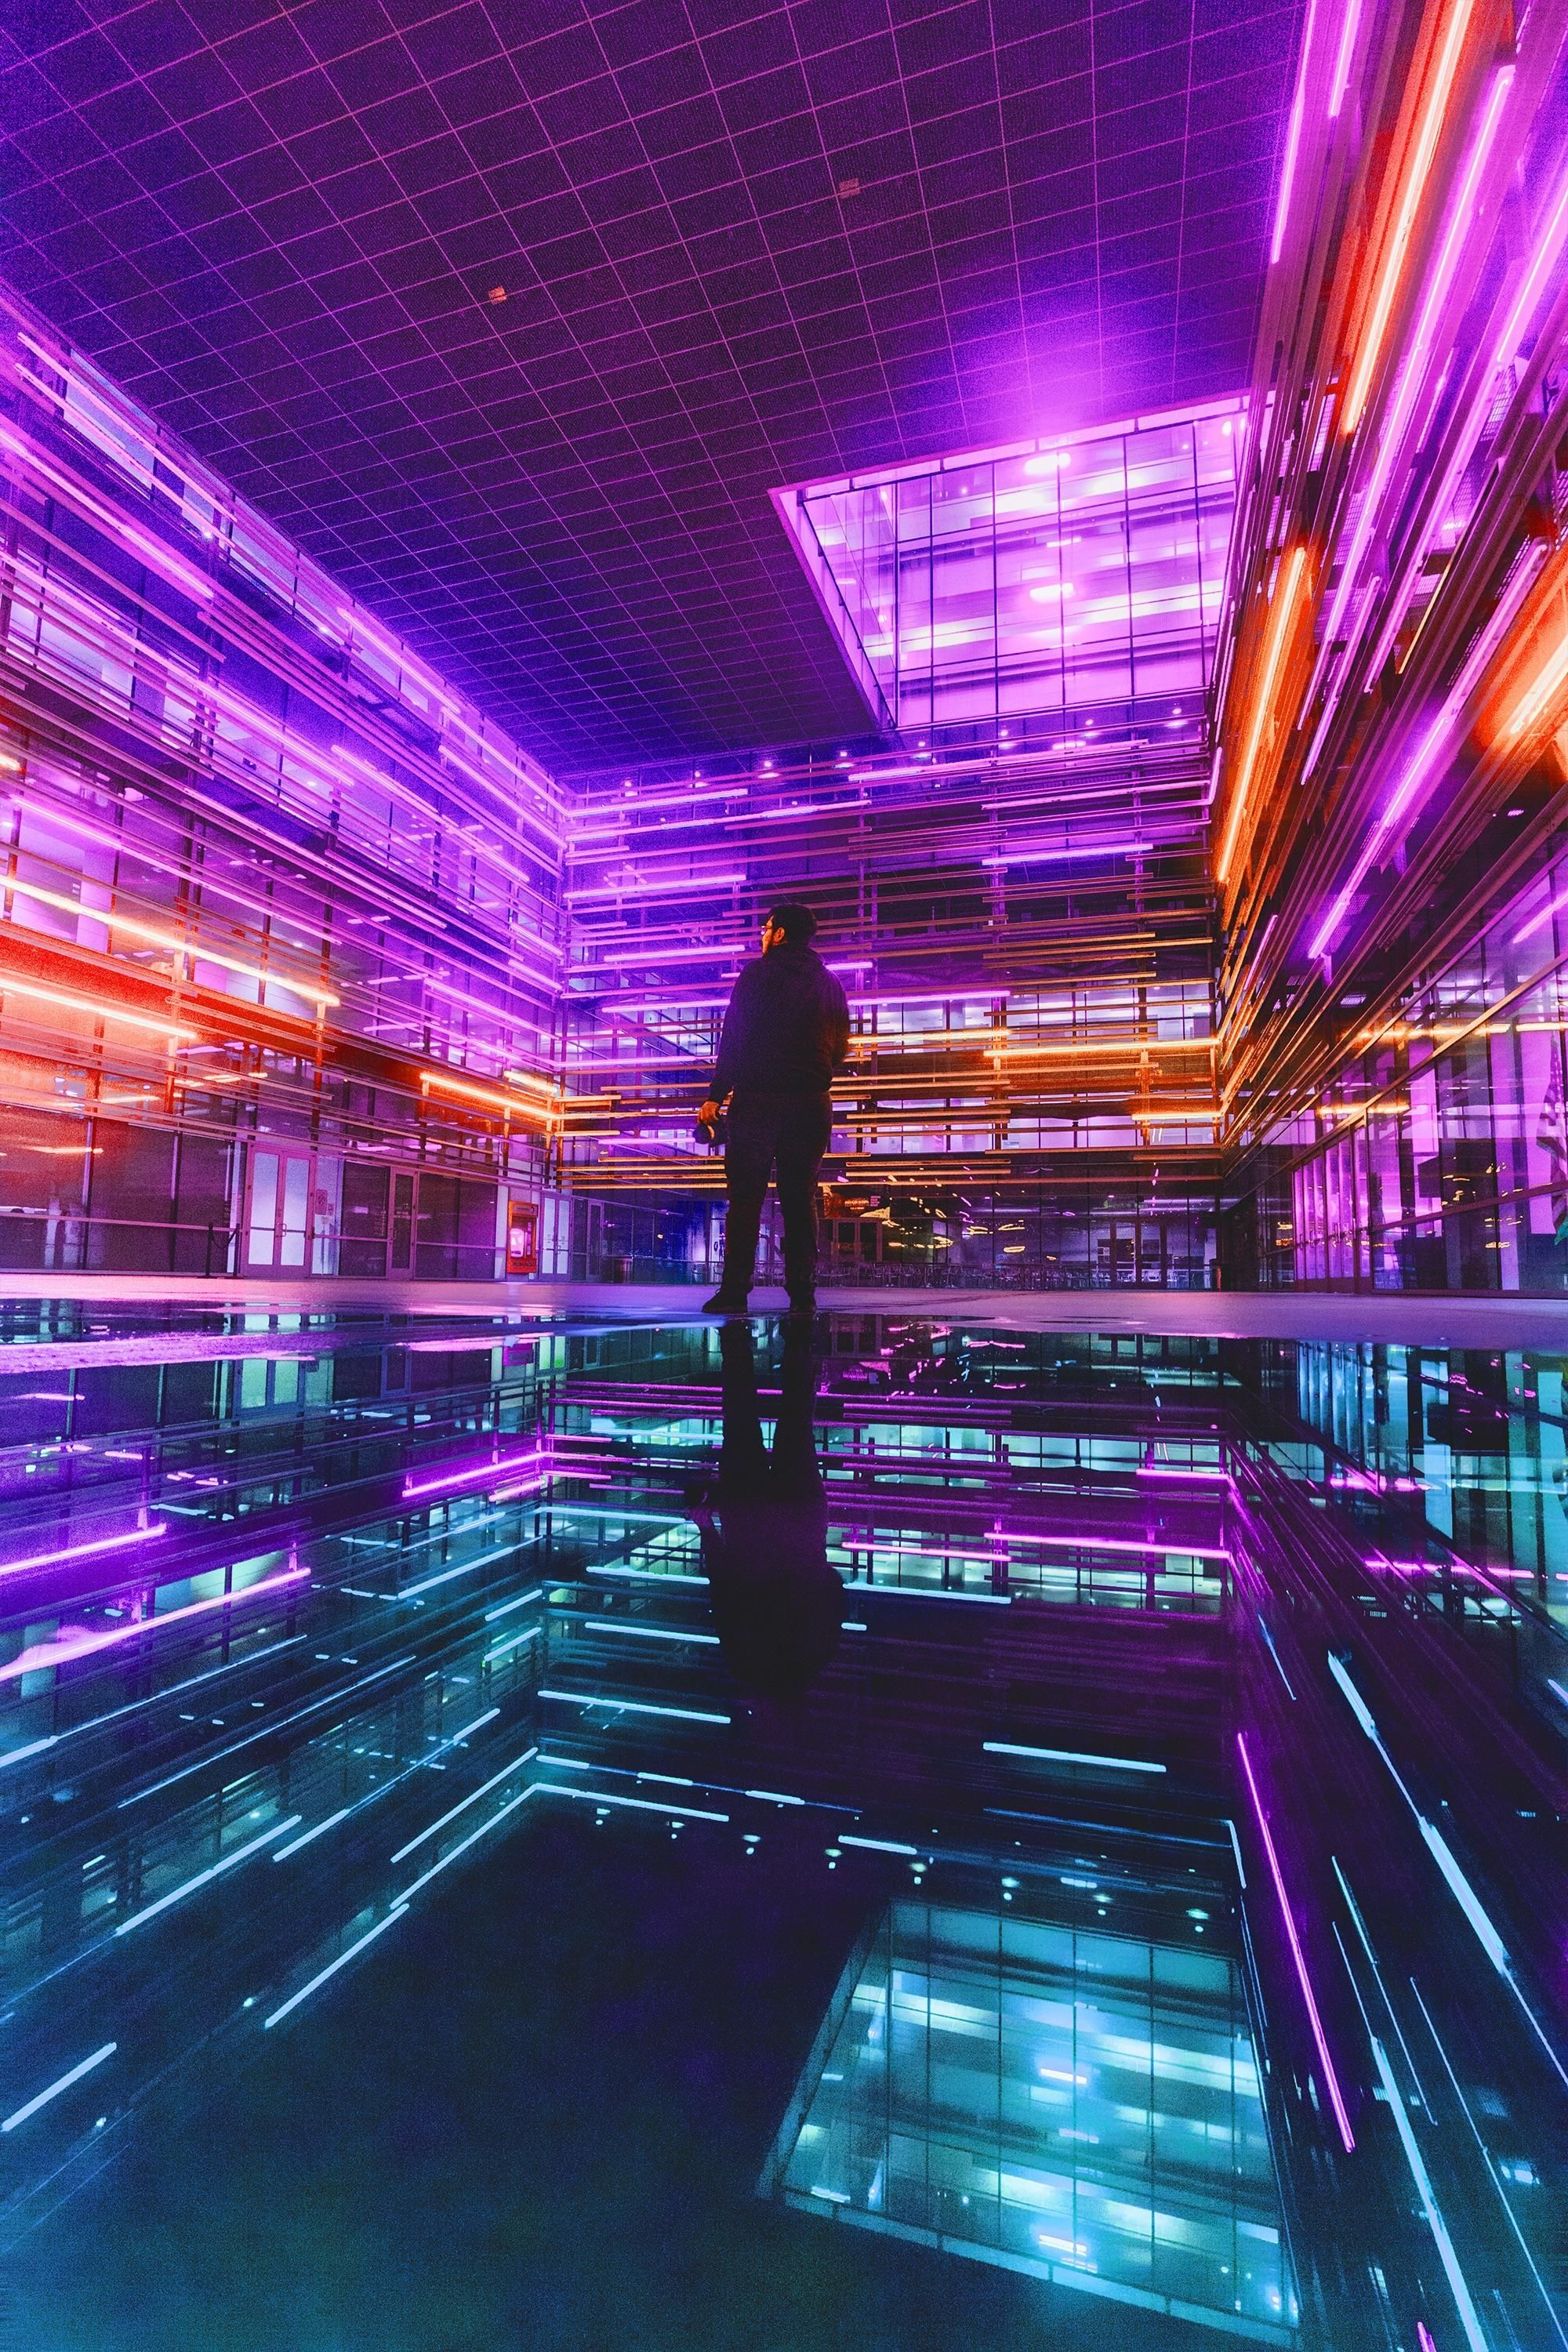 A person standing in front of an illuminated building - Neon